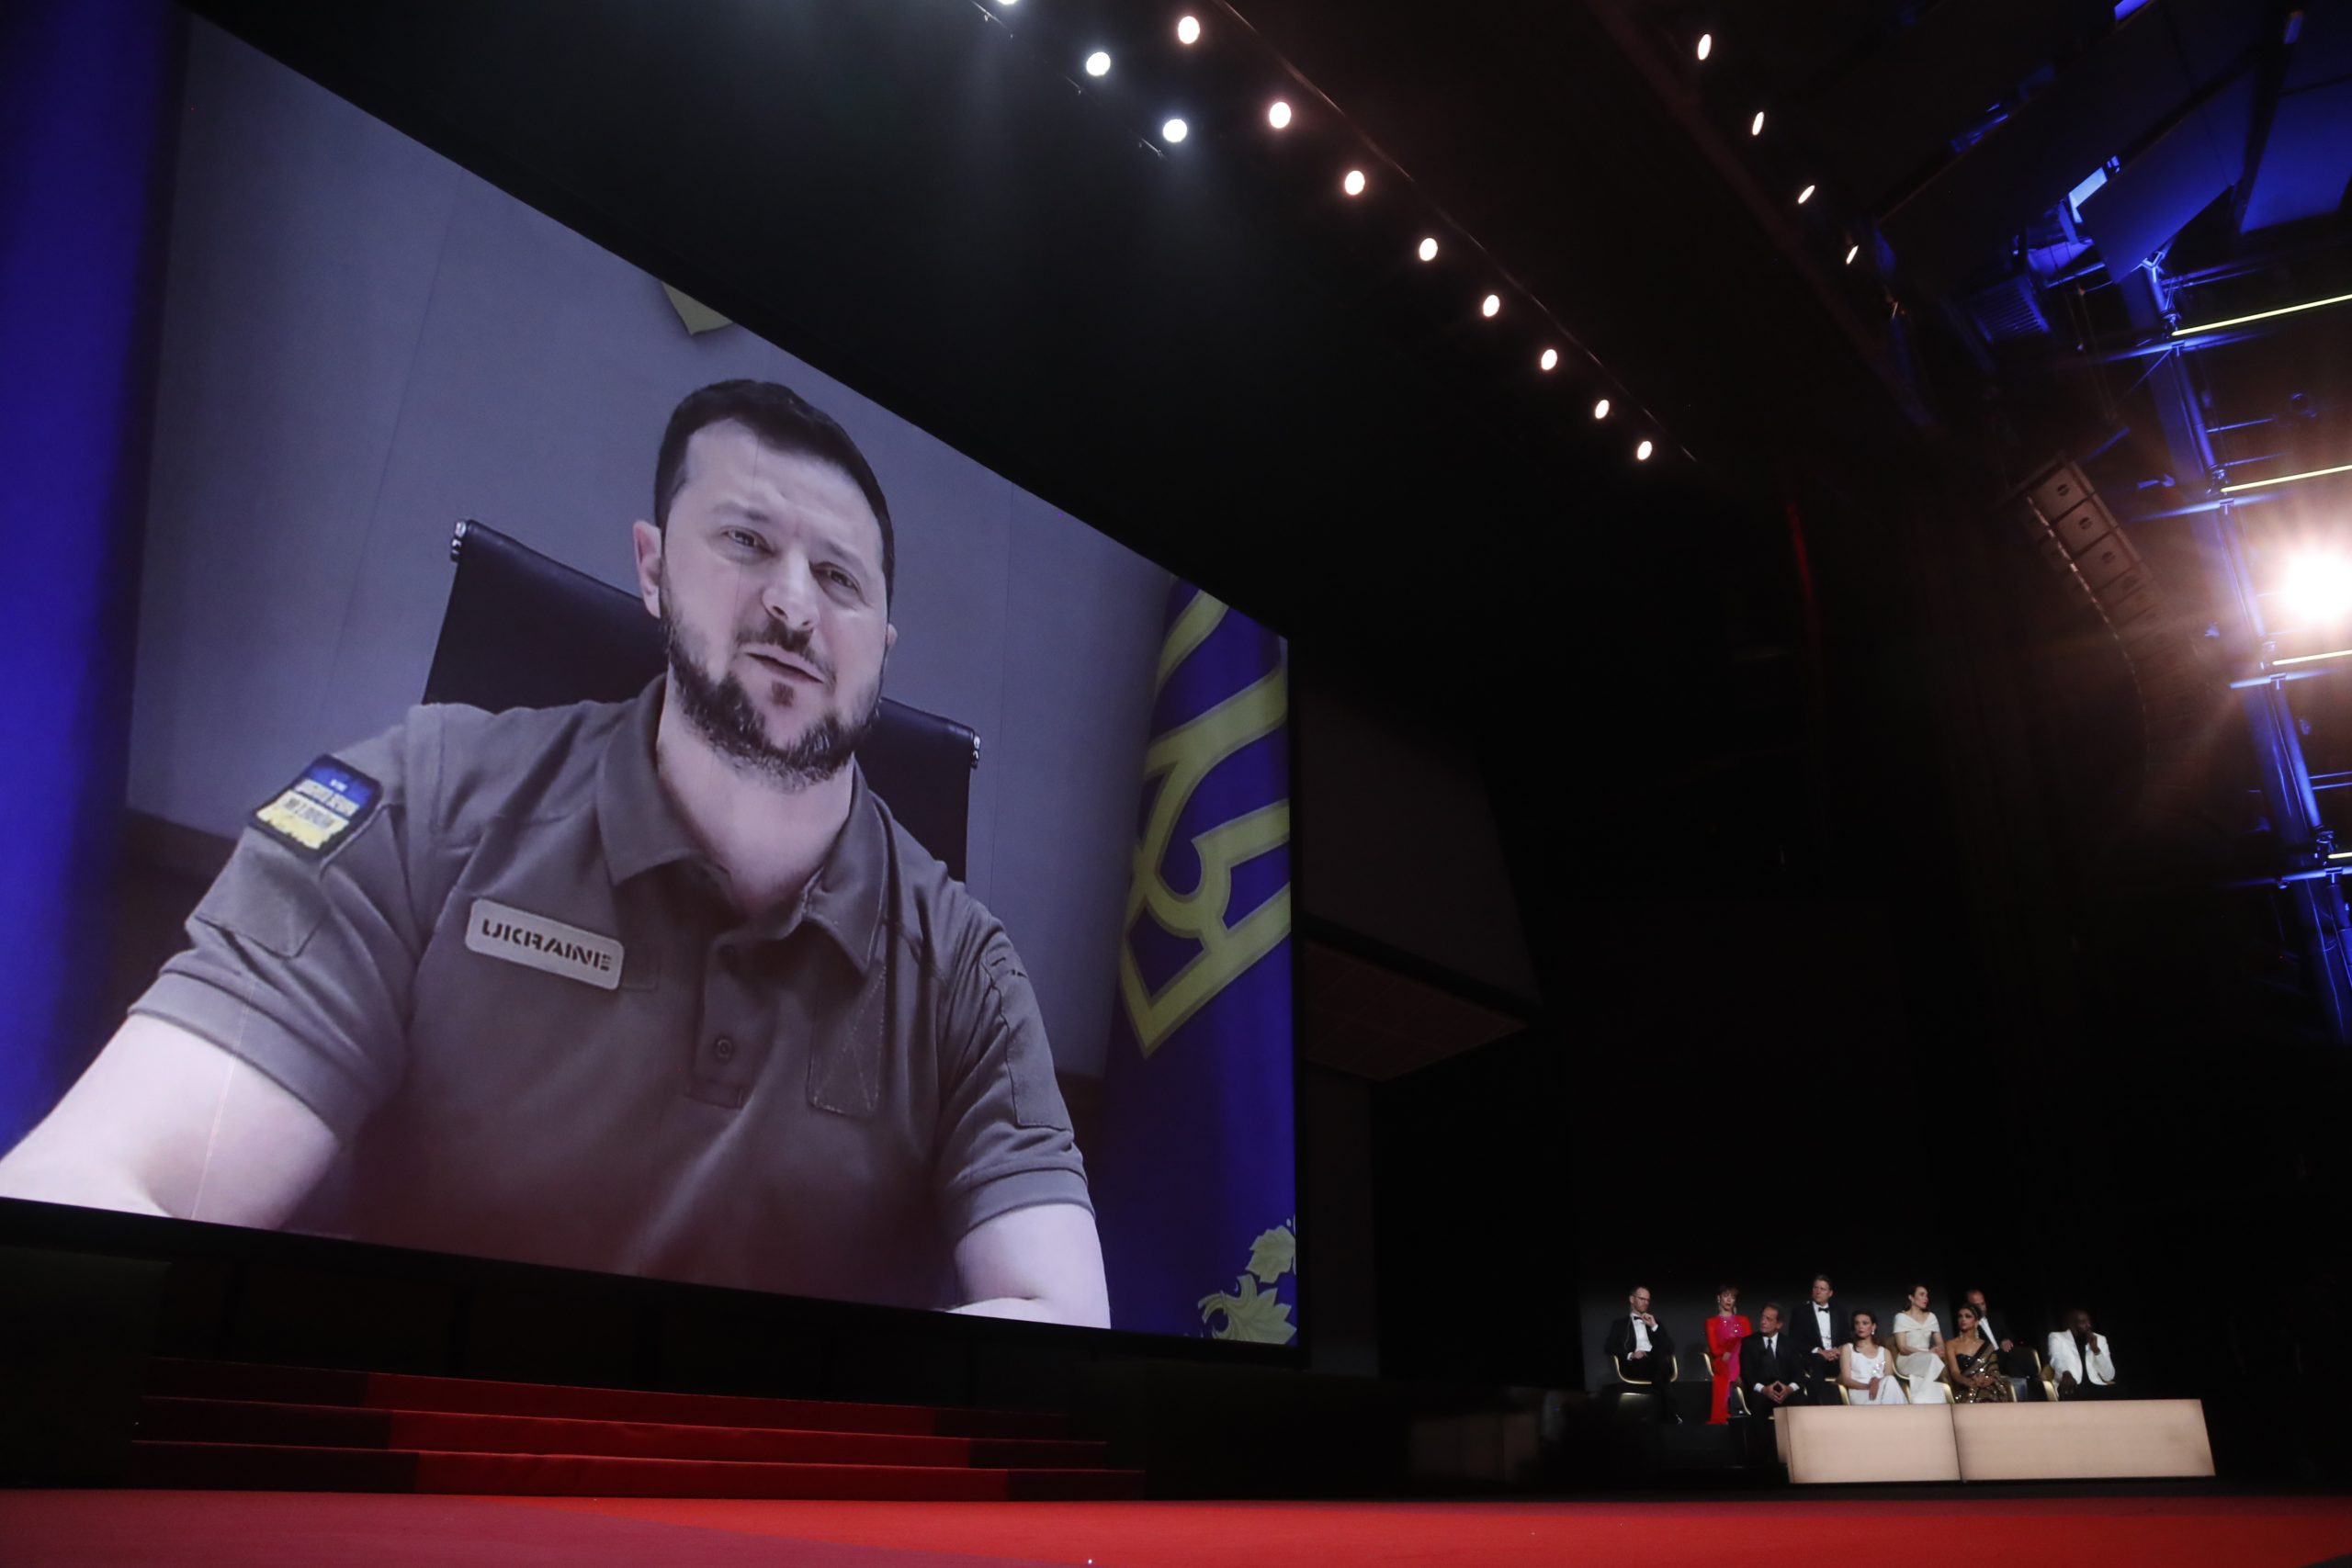 epa09953464 Ukraine's President Volodymyr Zelensky appears via remote on a screen during the Opening Ceremony of the 75th annual Cannes Film Festival, in Cannes, France, 17 May 2022. The festival runs from 17 to 28 May.  EPA/GUILLAUME HORCAJUELO